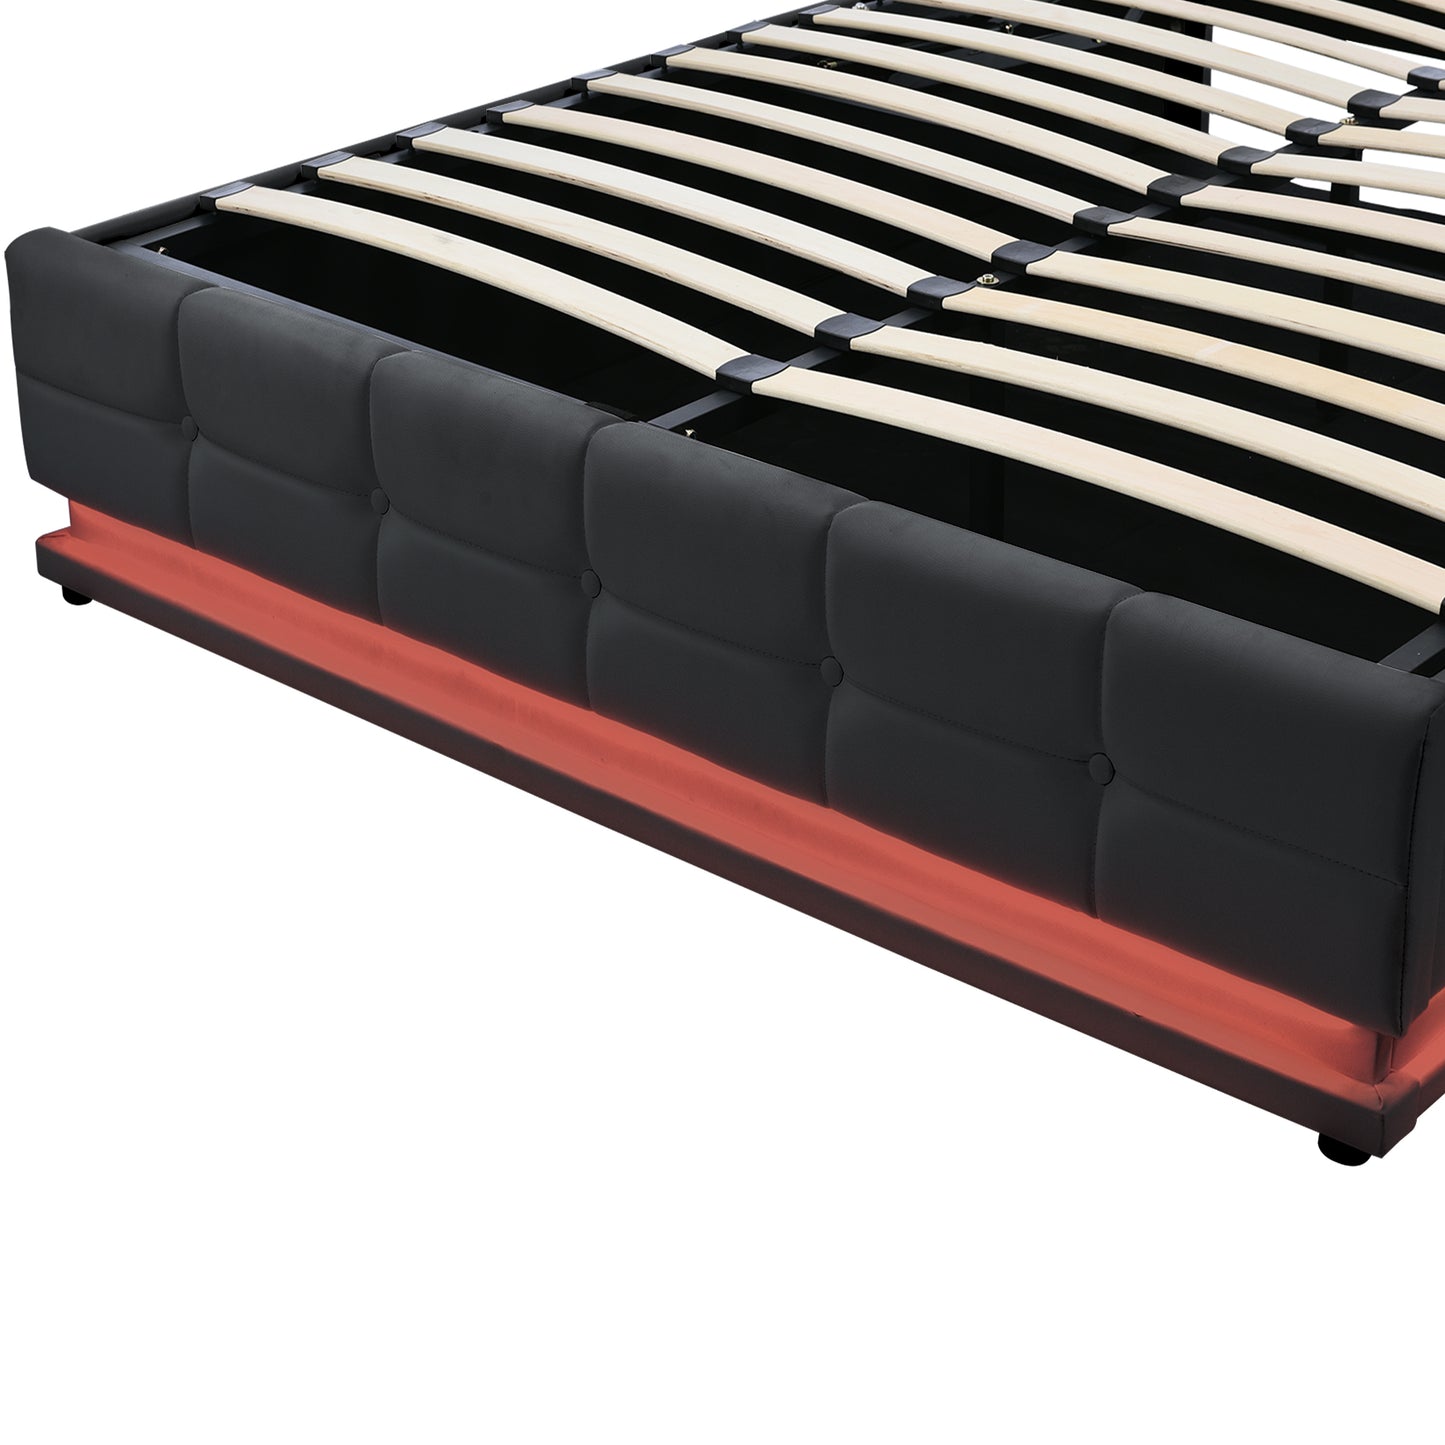 Luxury Dream Queen Bed with Smart Storage and LED Illumination - Black